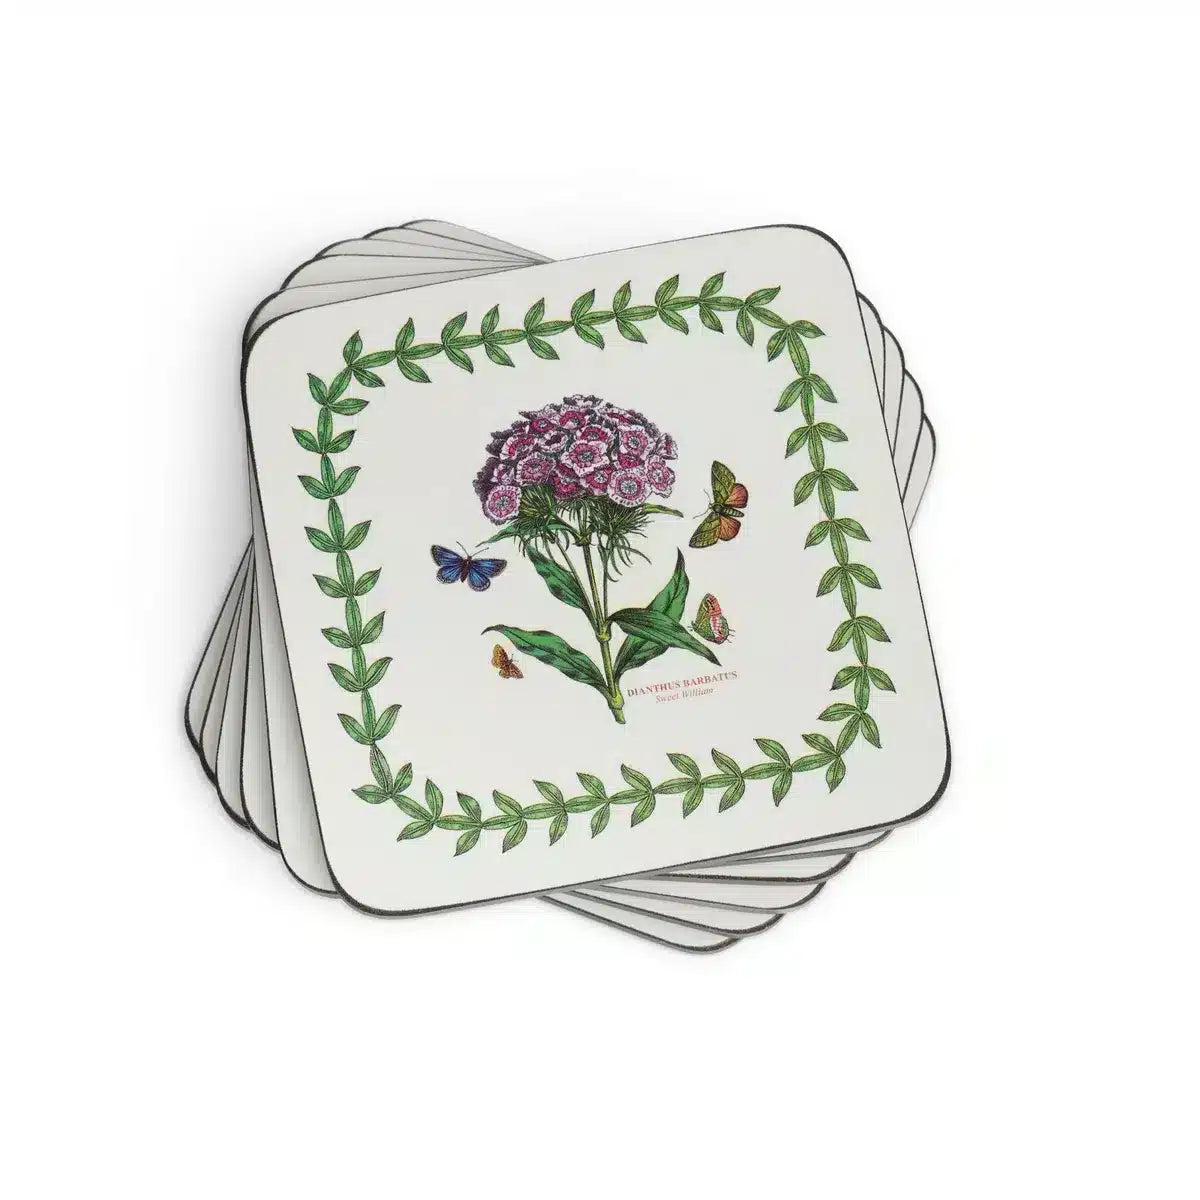 Pimpernel Botanic Garden Coasters, Set of 6, 4 Inches x 4 Inches 2177